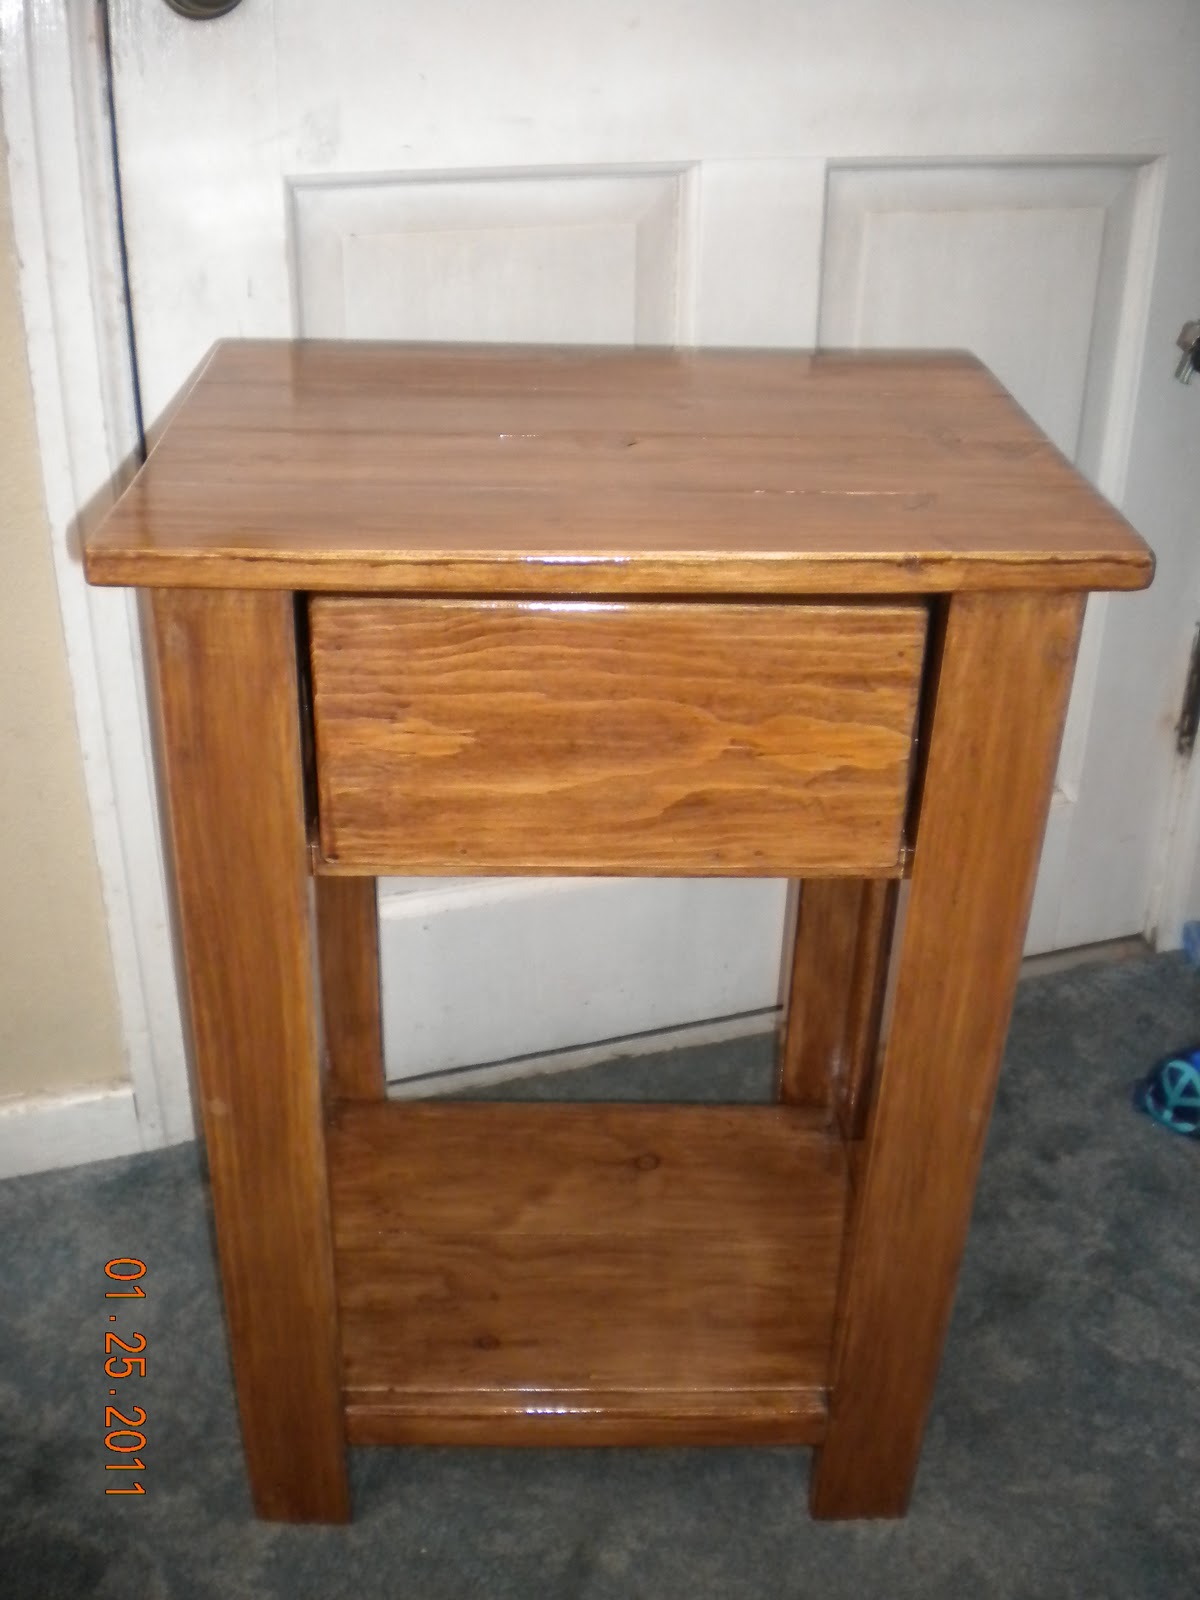 Sheila's Furniture and Crafts: Simple Night Stand